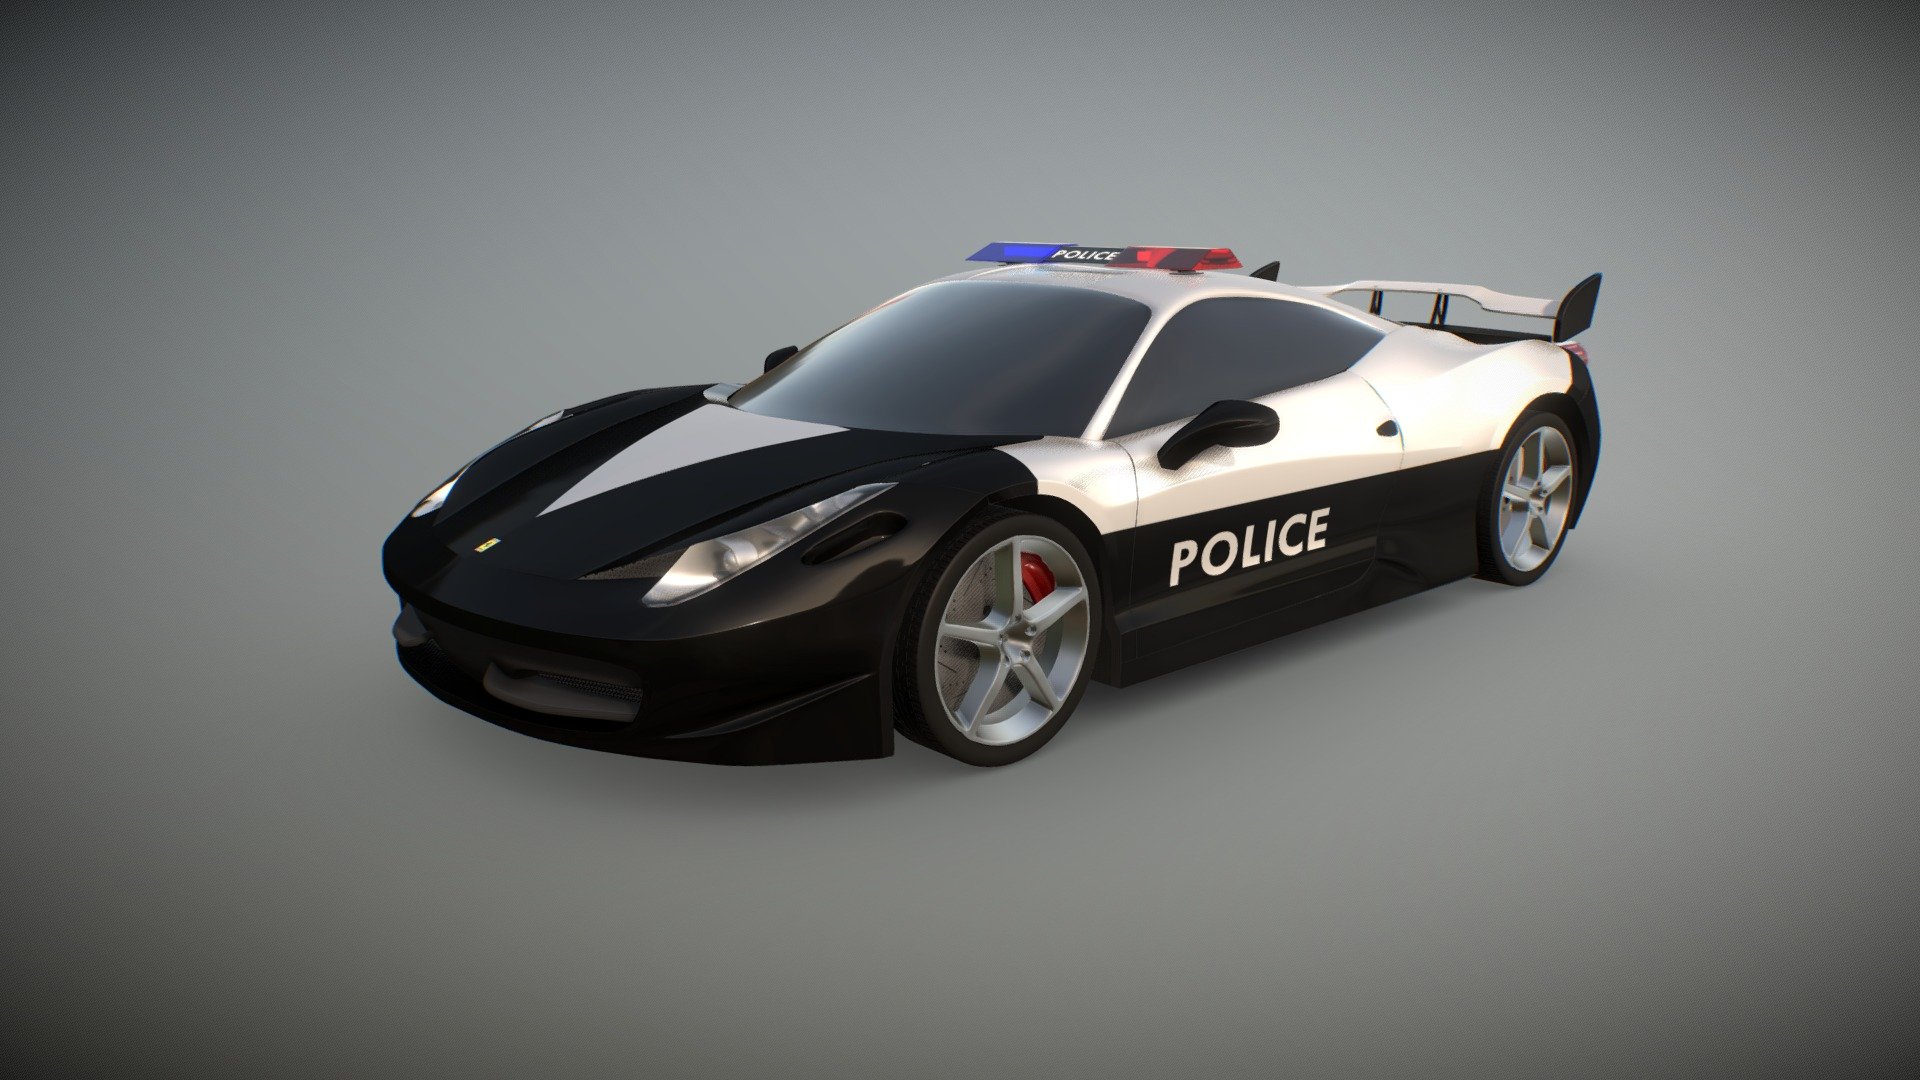 Check it out on youtube: http://www.youtube.com/watch?v=ZhLn8lK0xDA&amp;feature=youtu.be - Ferrari Italia Police - 3D model by yousufmohd 3d model